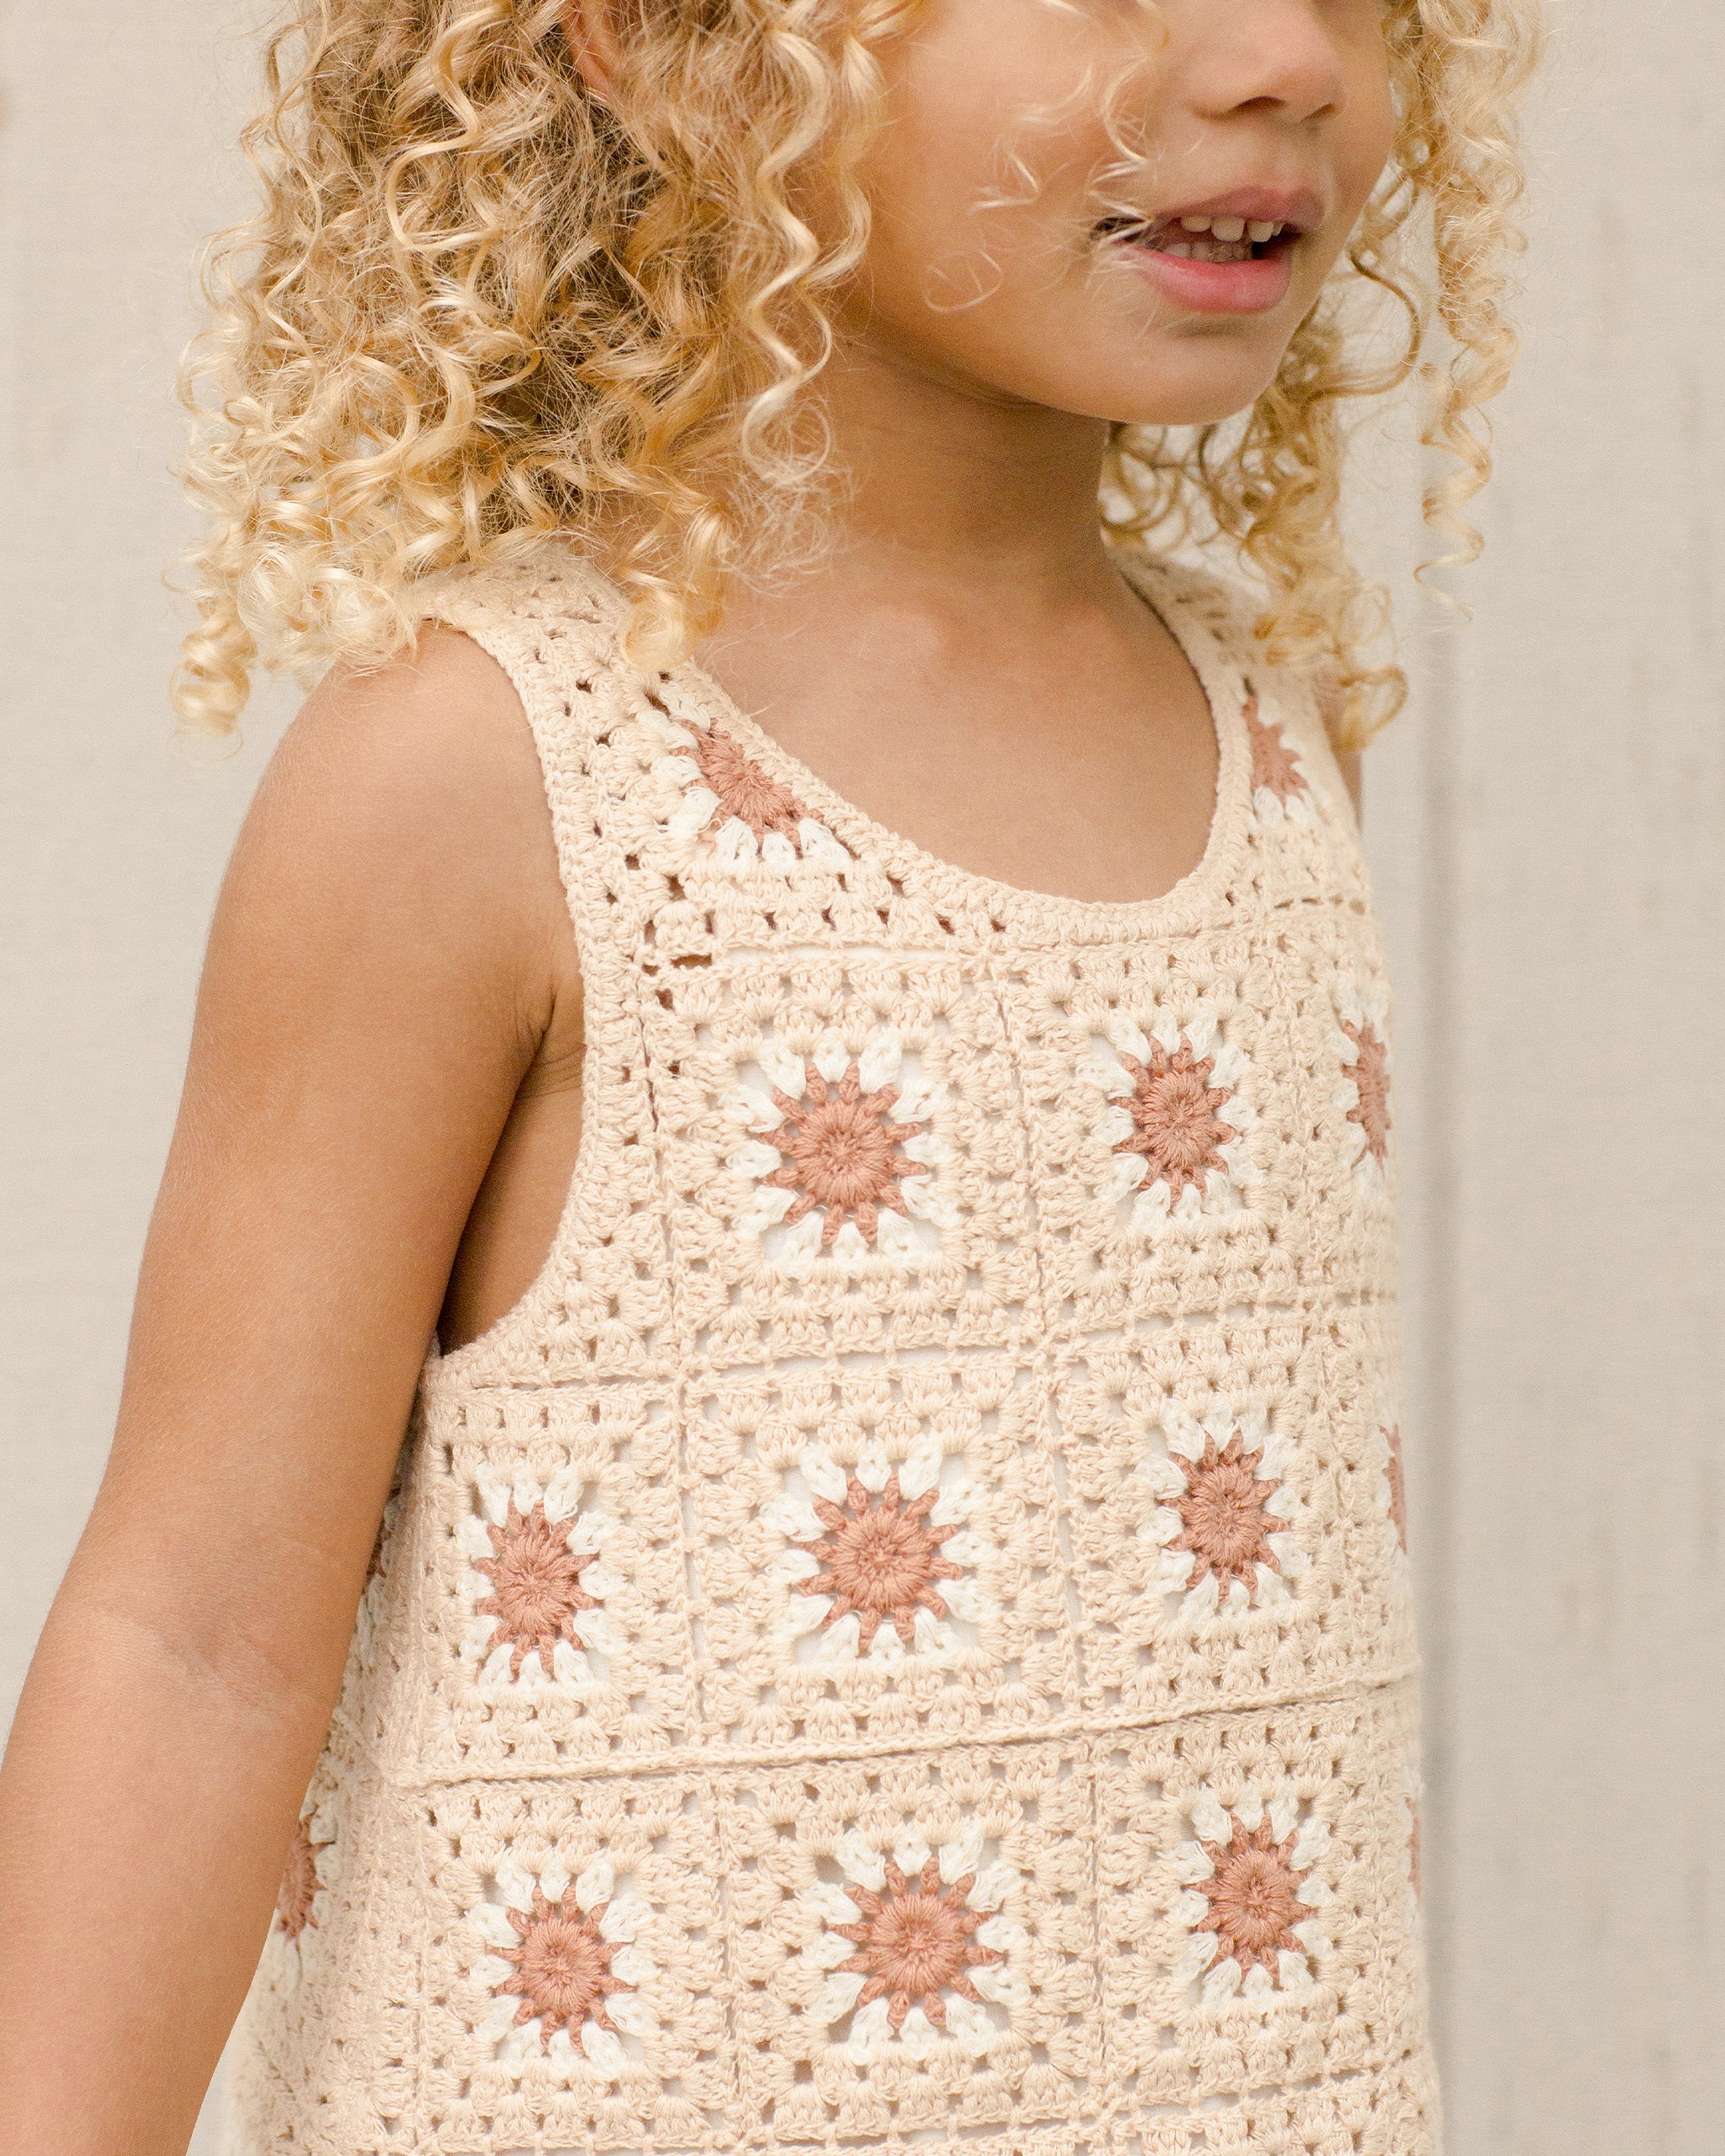 Crochet Tank Mini Dress || Floral - Rylee + Cru | Kids Clothes | Trendy Baby Clothes | Modern Infant Outfits |